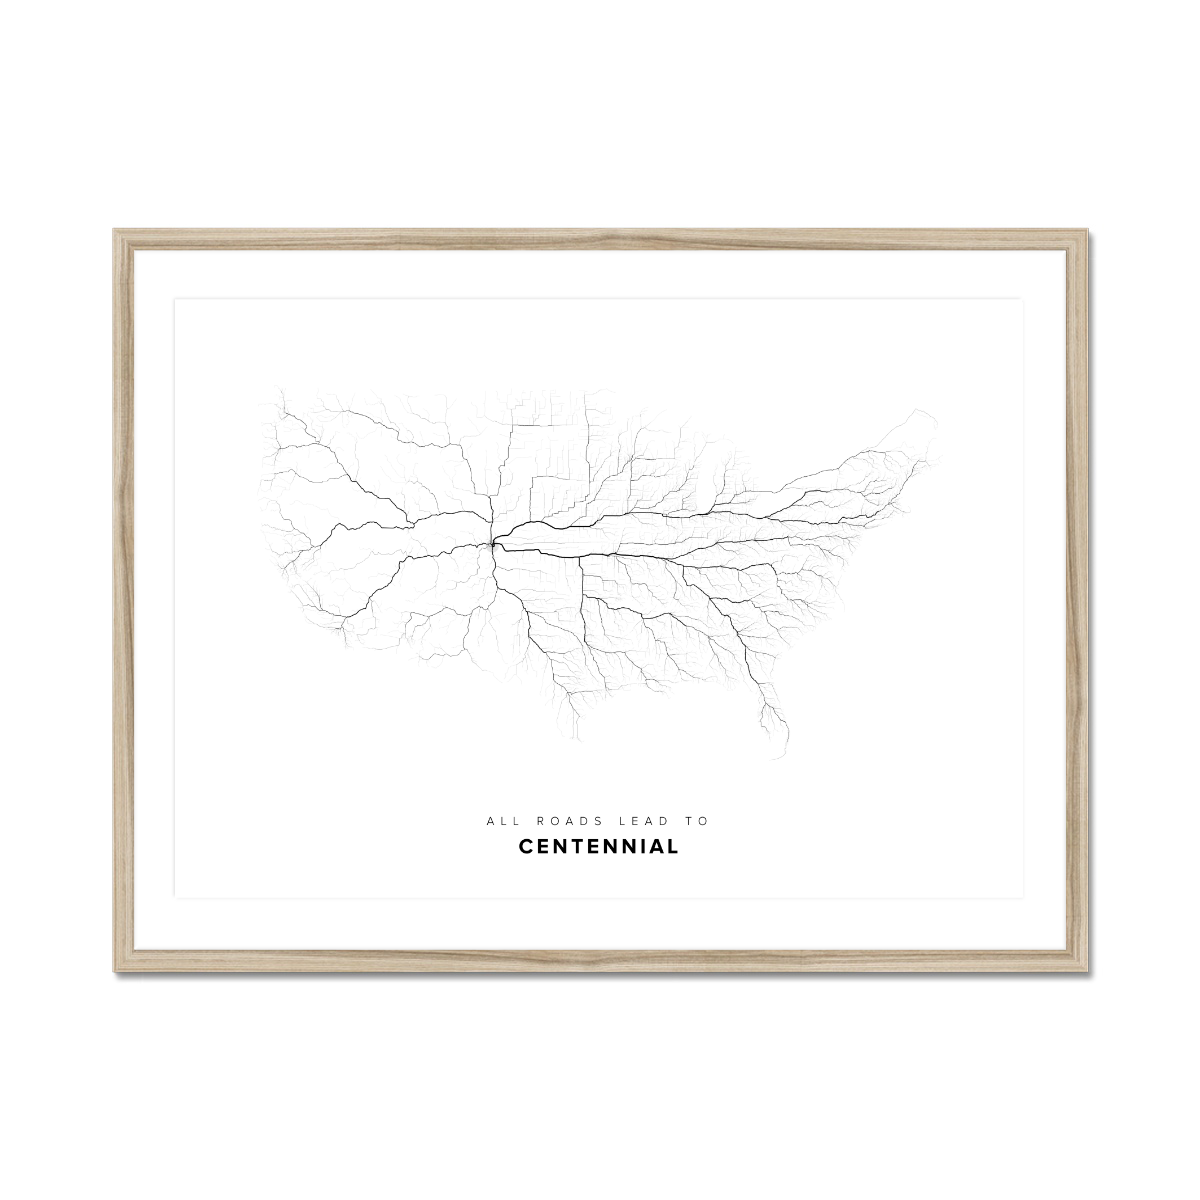 All roads lead to Centennial (United States of America) Fine Art Map Print